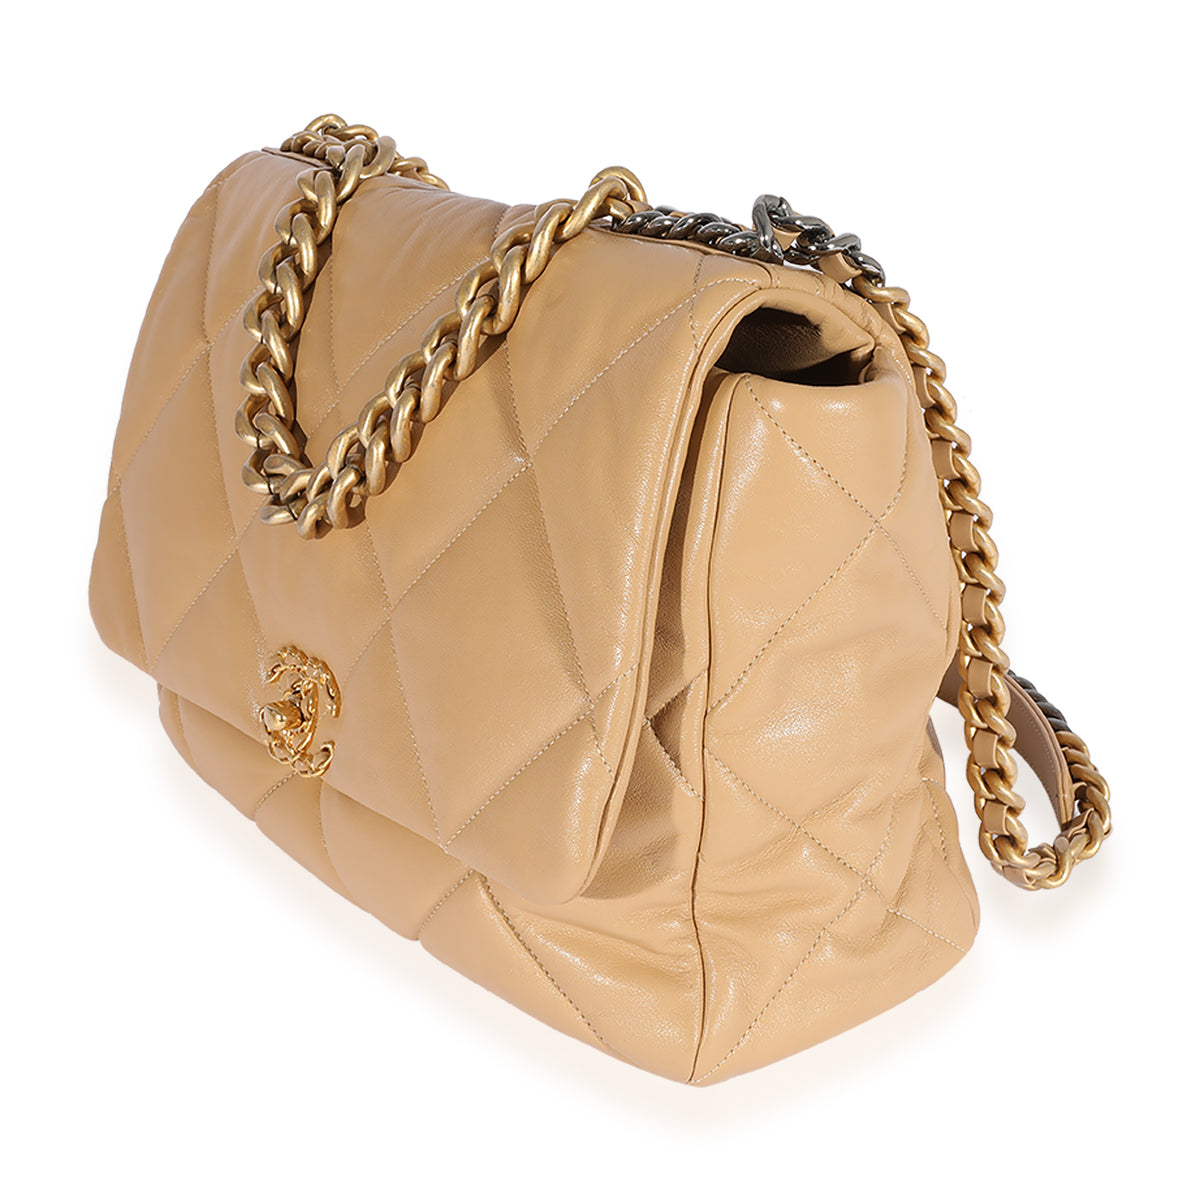 Chanel 19 Flap Bag In Pastel Yellow Lambskin With Gold Hardware in Natural